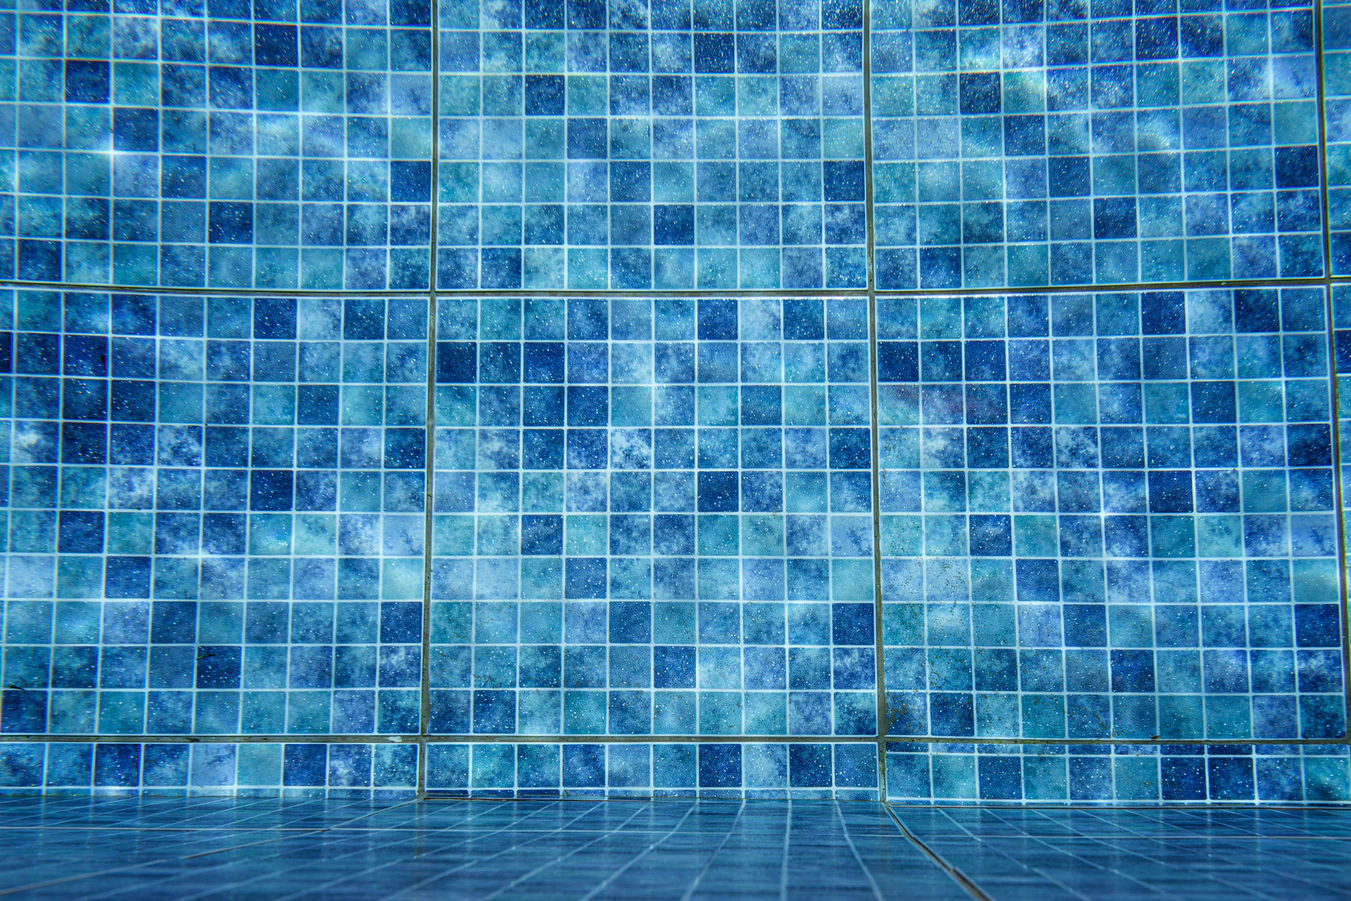 small squares of mosaic blue tiles underwater in a pool renovation project